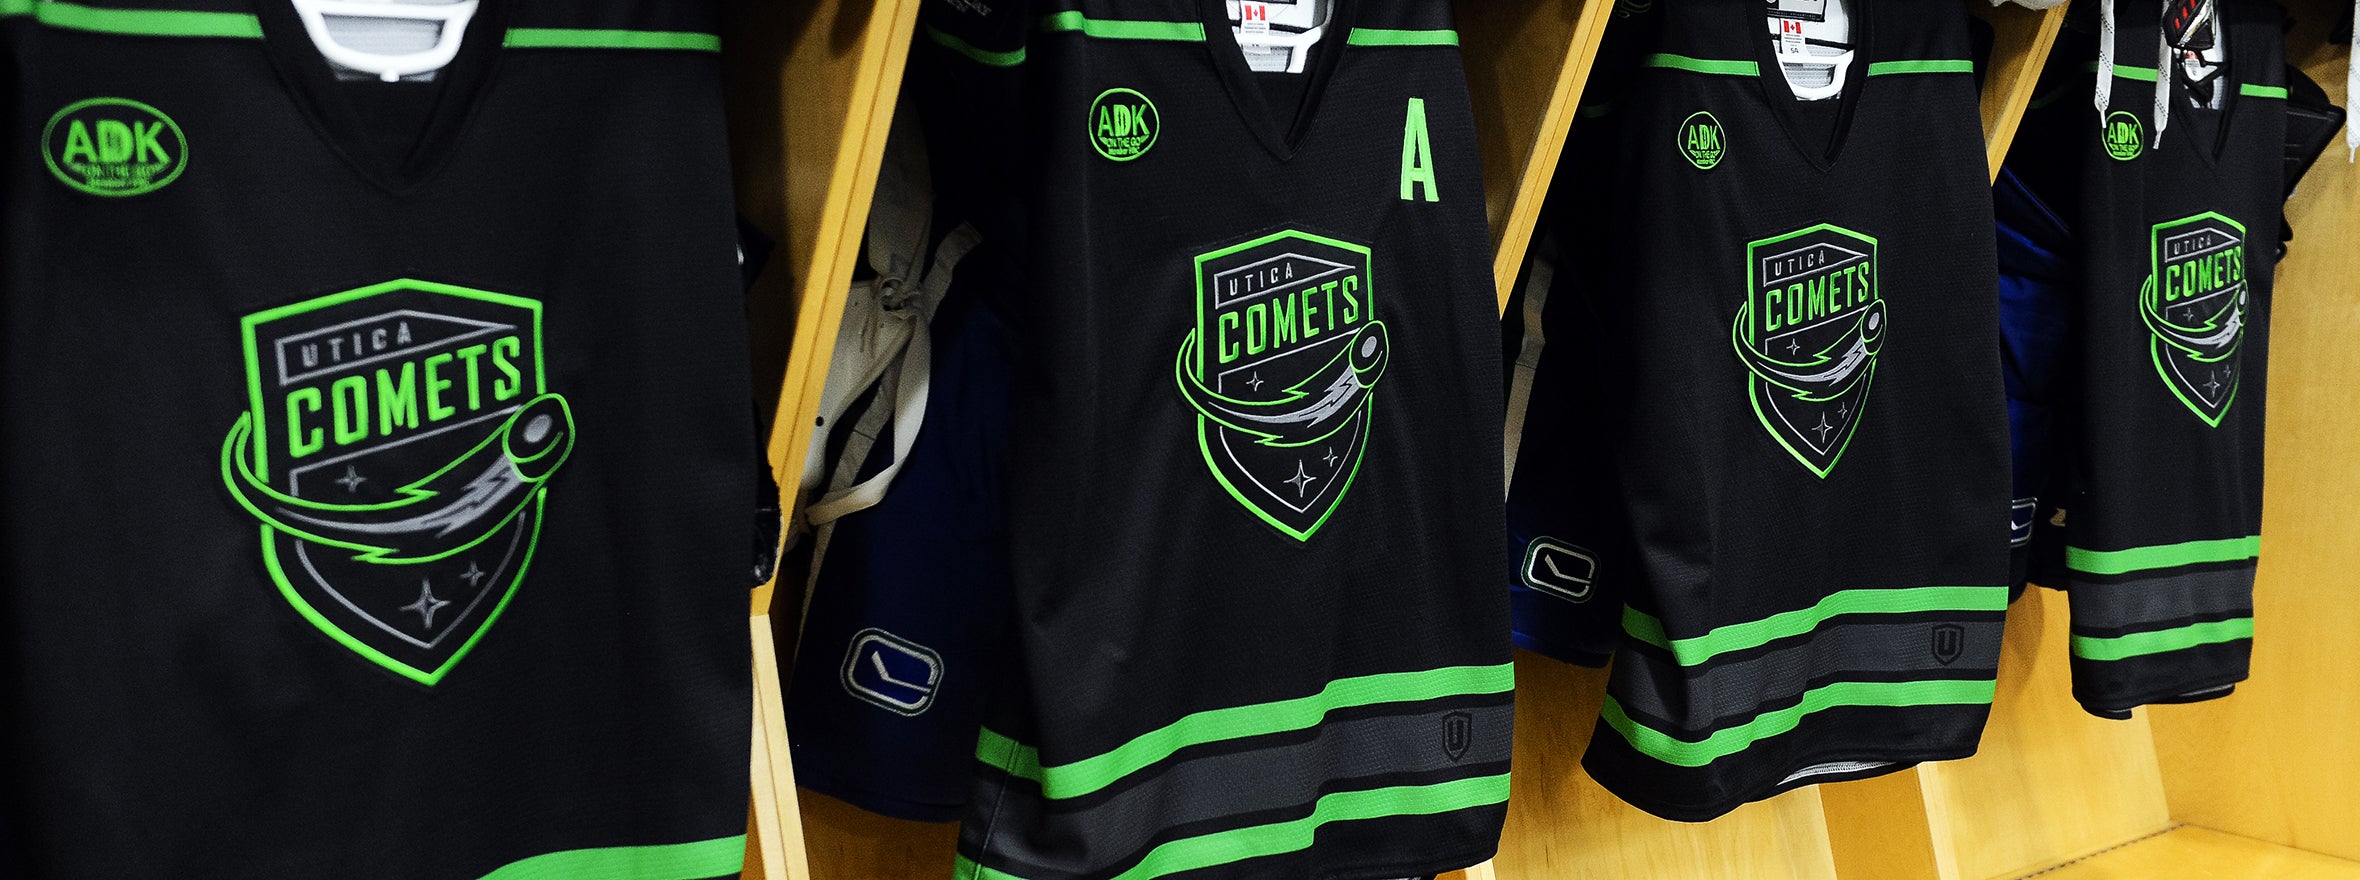 COMETS ANNOUNCE DETAILS OF THIRD ANNUAL